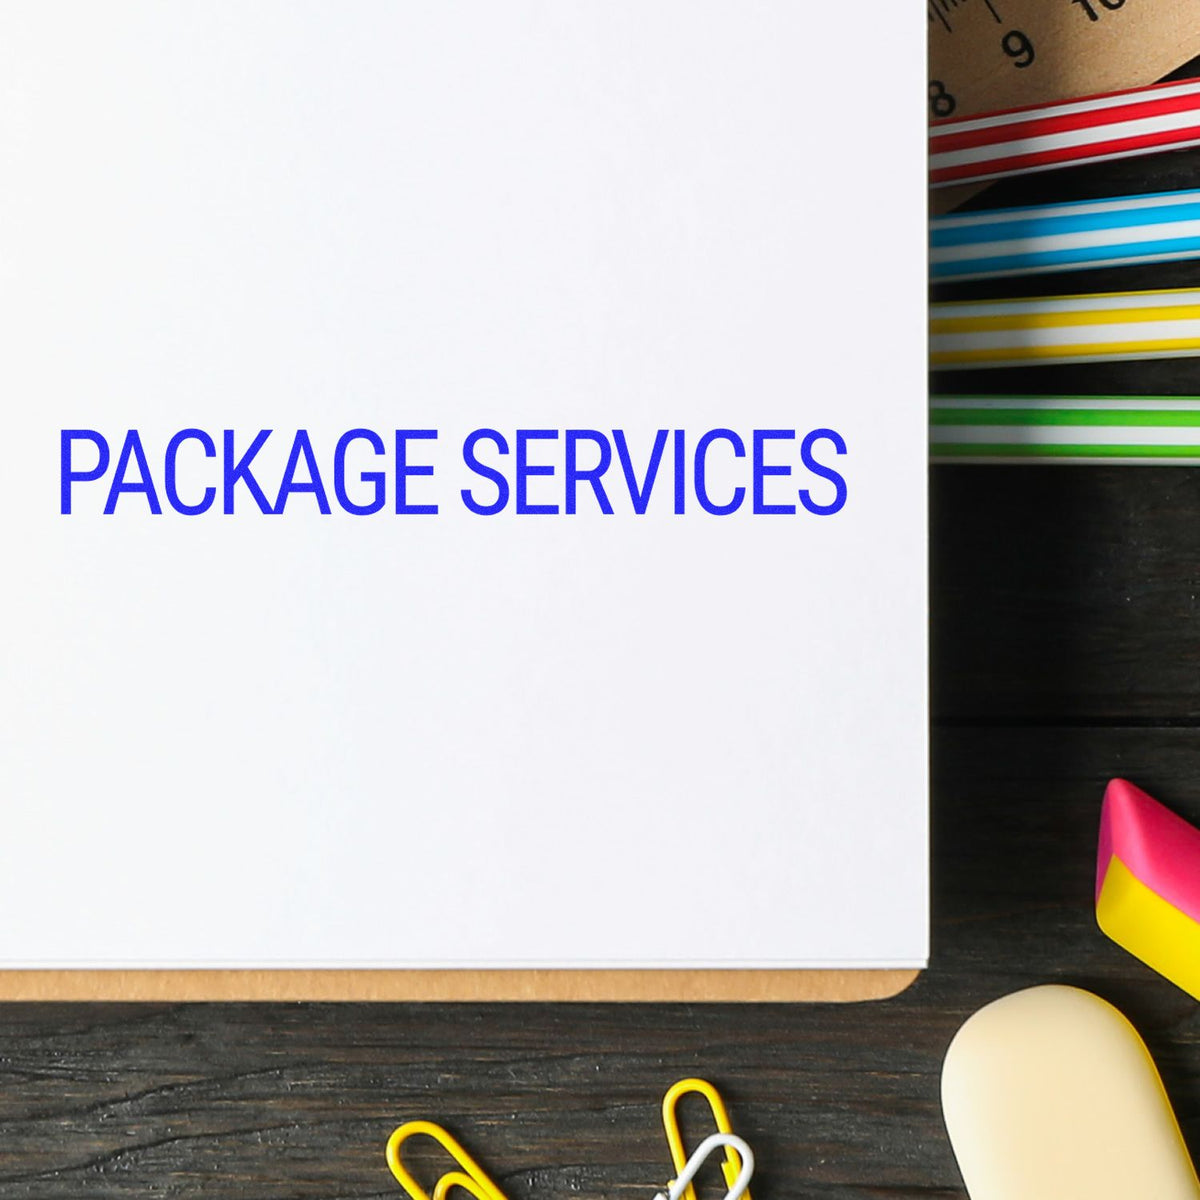 Package Services Rubber Stamp In Use Photo